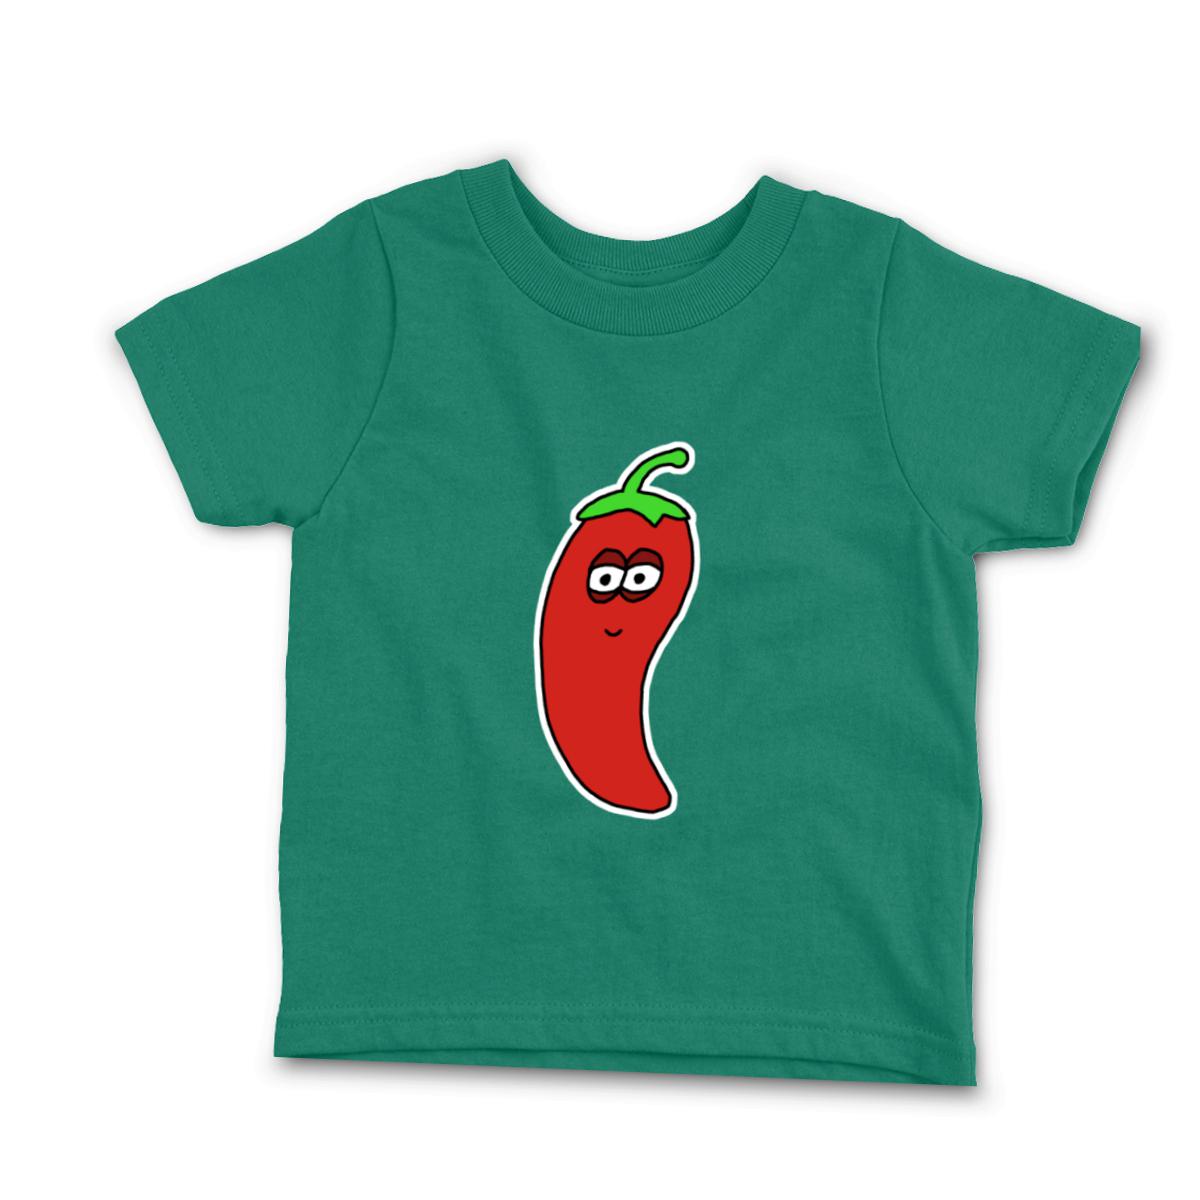 Chili Pepper Toddler Tee 56T kelly